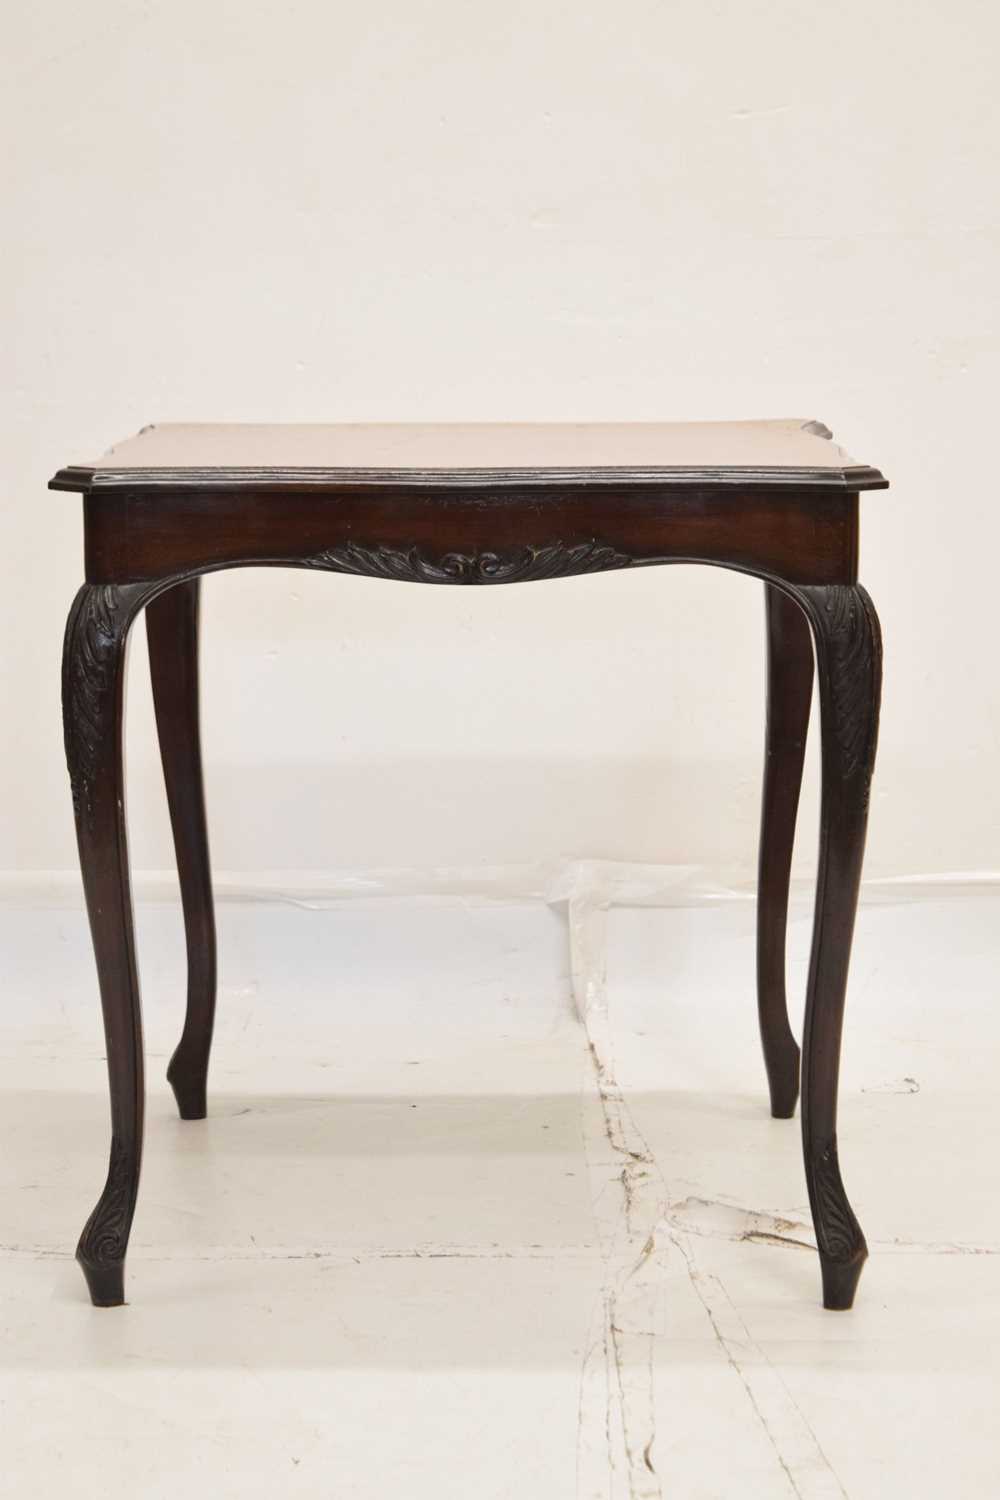 Edwardian carved walnut serpentine centre table - Image 2 of 6